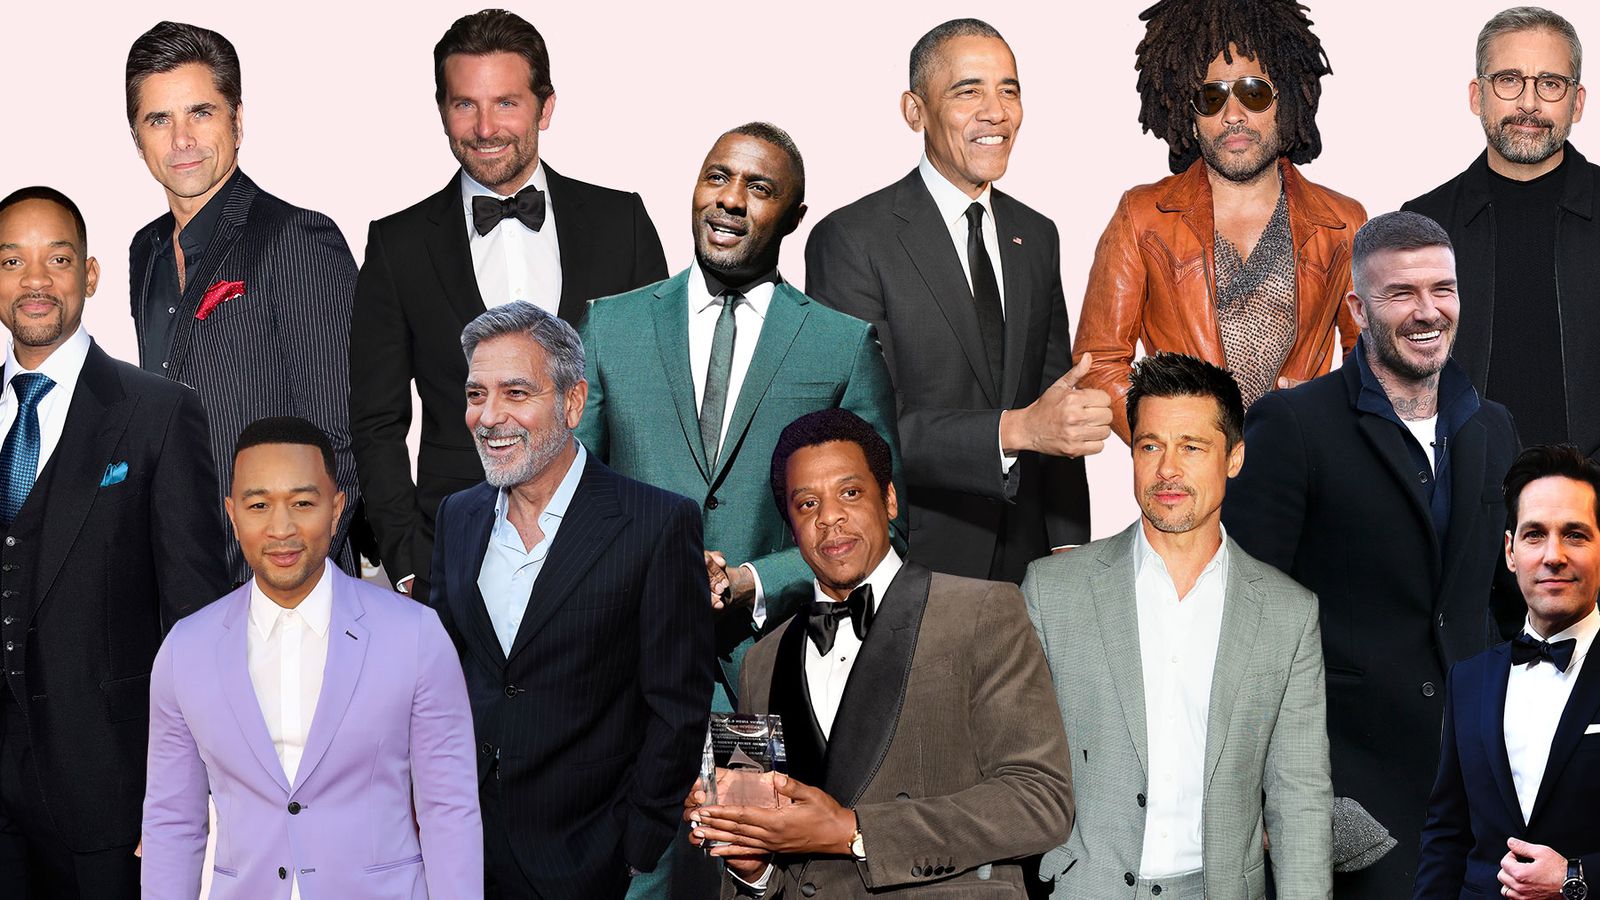 Hot Celebrity Dads - Vote for Hollywood's Sexiest Older Men | Marie Claire